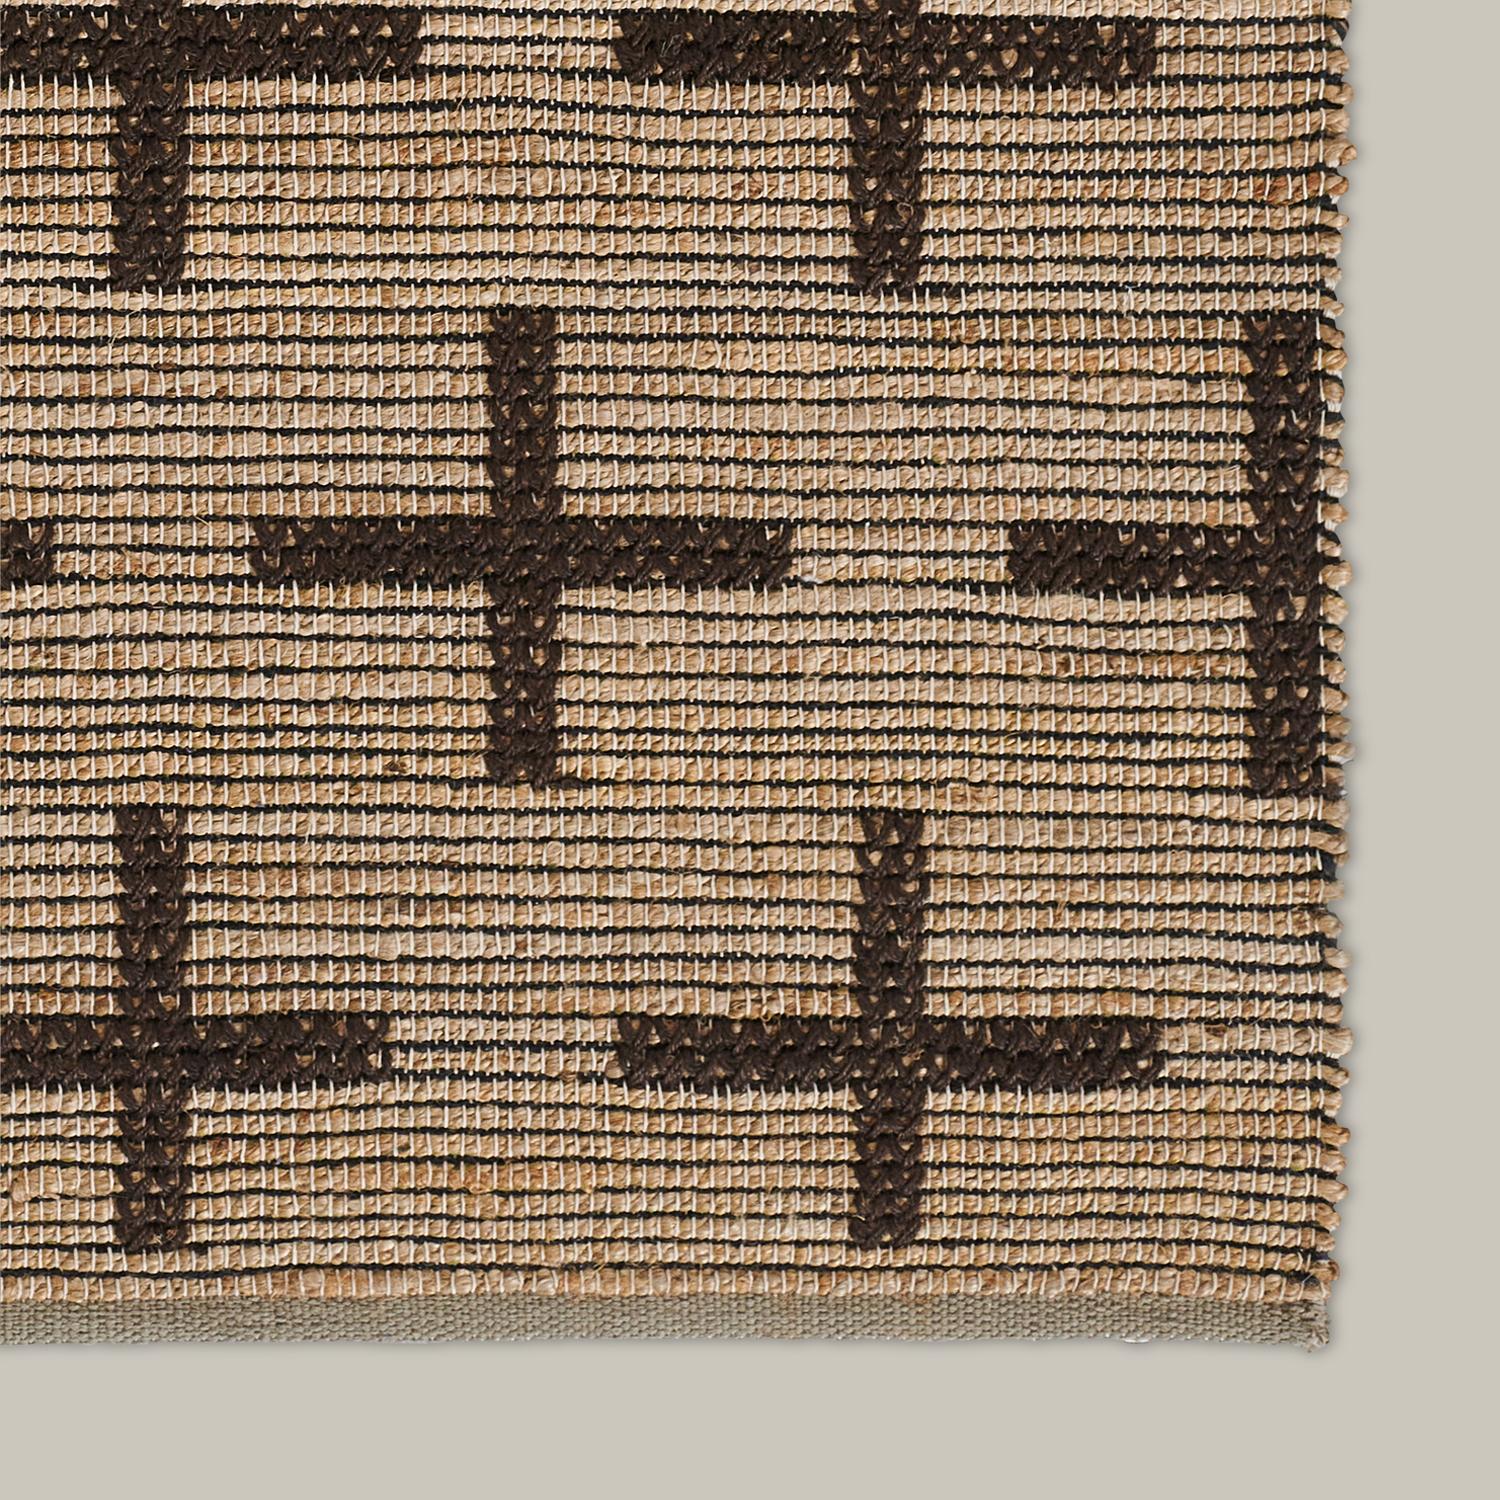 The Pontoise collection offers a modern, organic aesthetic with a bit of graphic appeal. Woven entirely by hand using 100% jute fibers, a special top-stitching embroidery technique is applied over a flat-weave base, giving these rugs beautiful